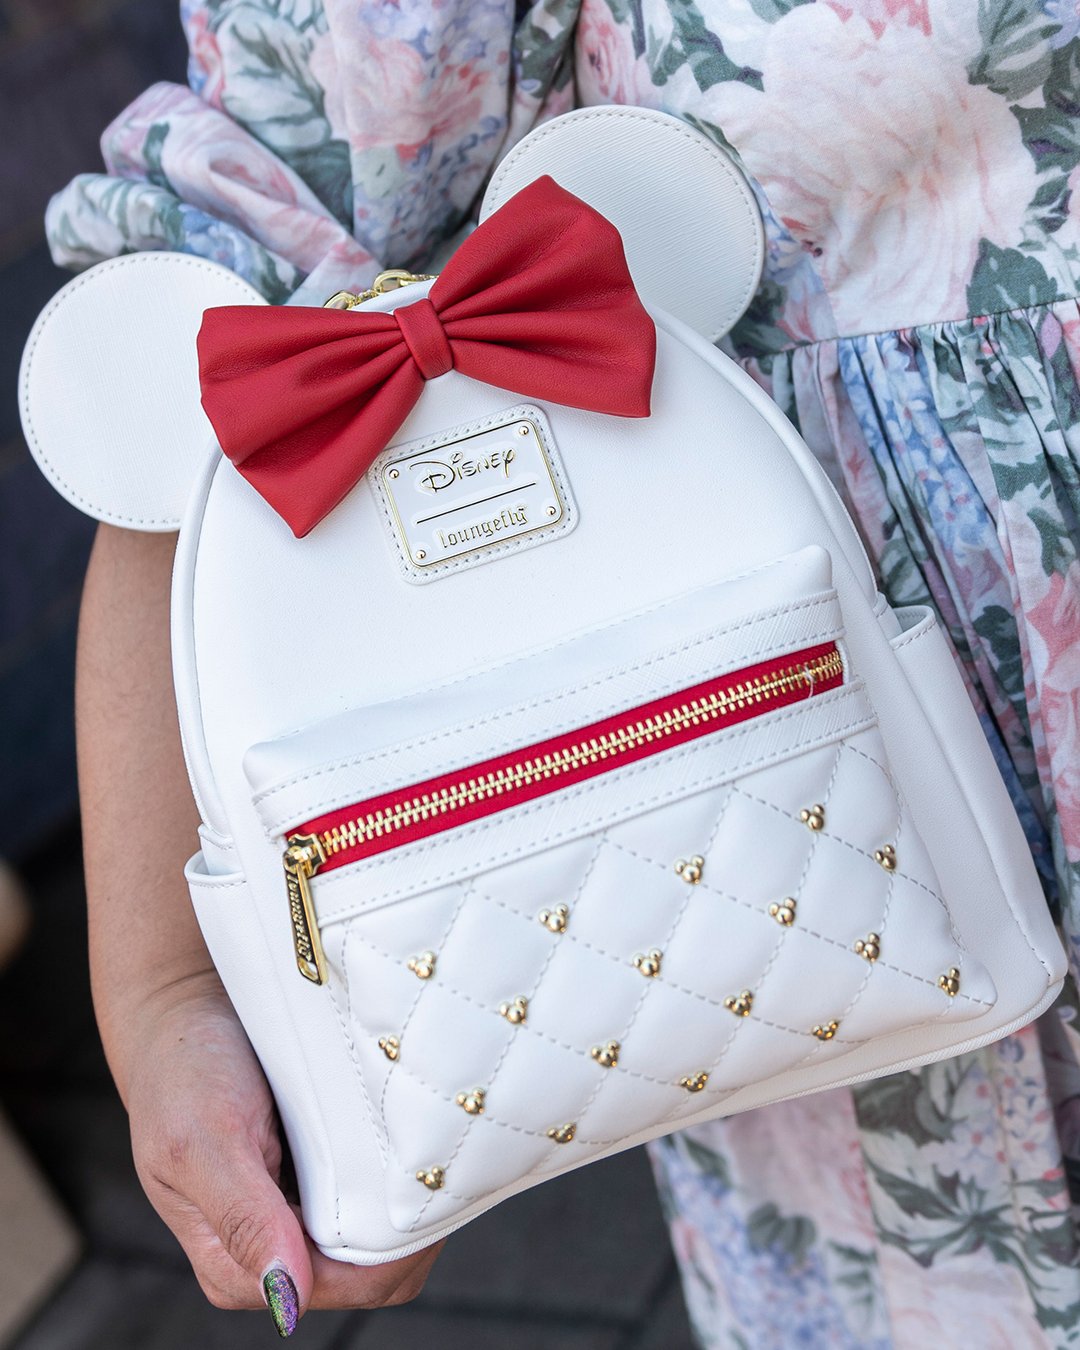 707 Street Exclusive - Loungefly Disney The Minnie Mouse Classic Series Mini Backpack - The Sweetheart - Front Lifestyle - 671803450738